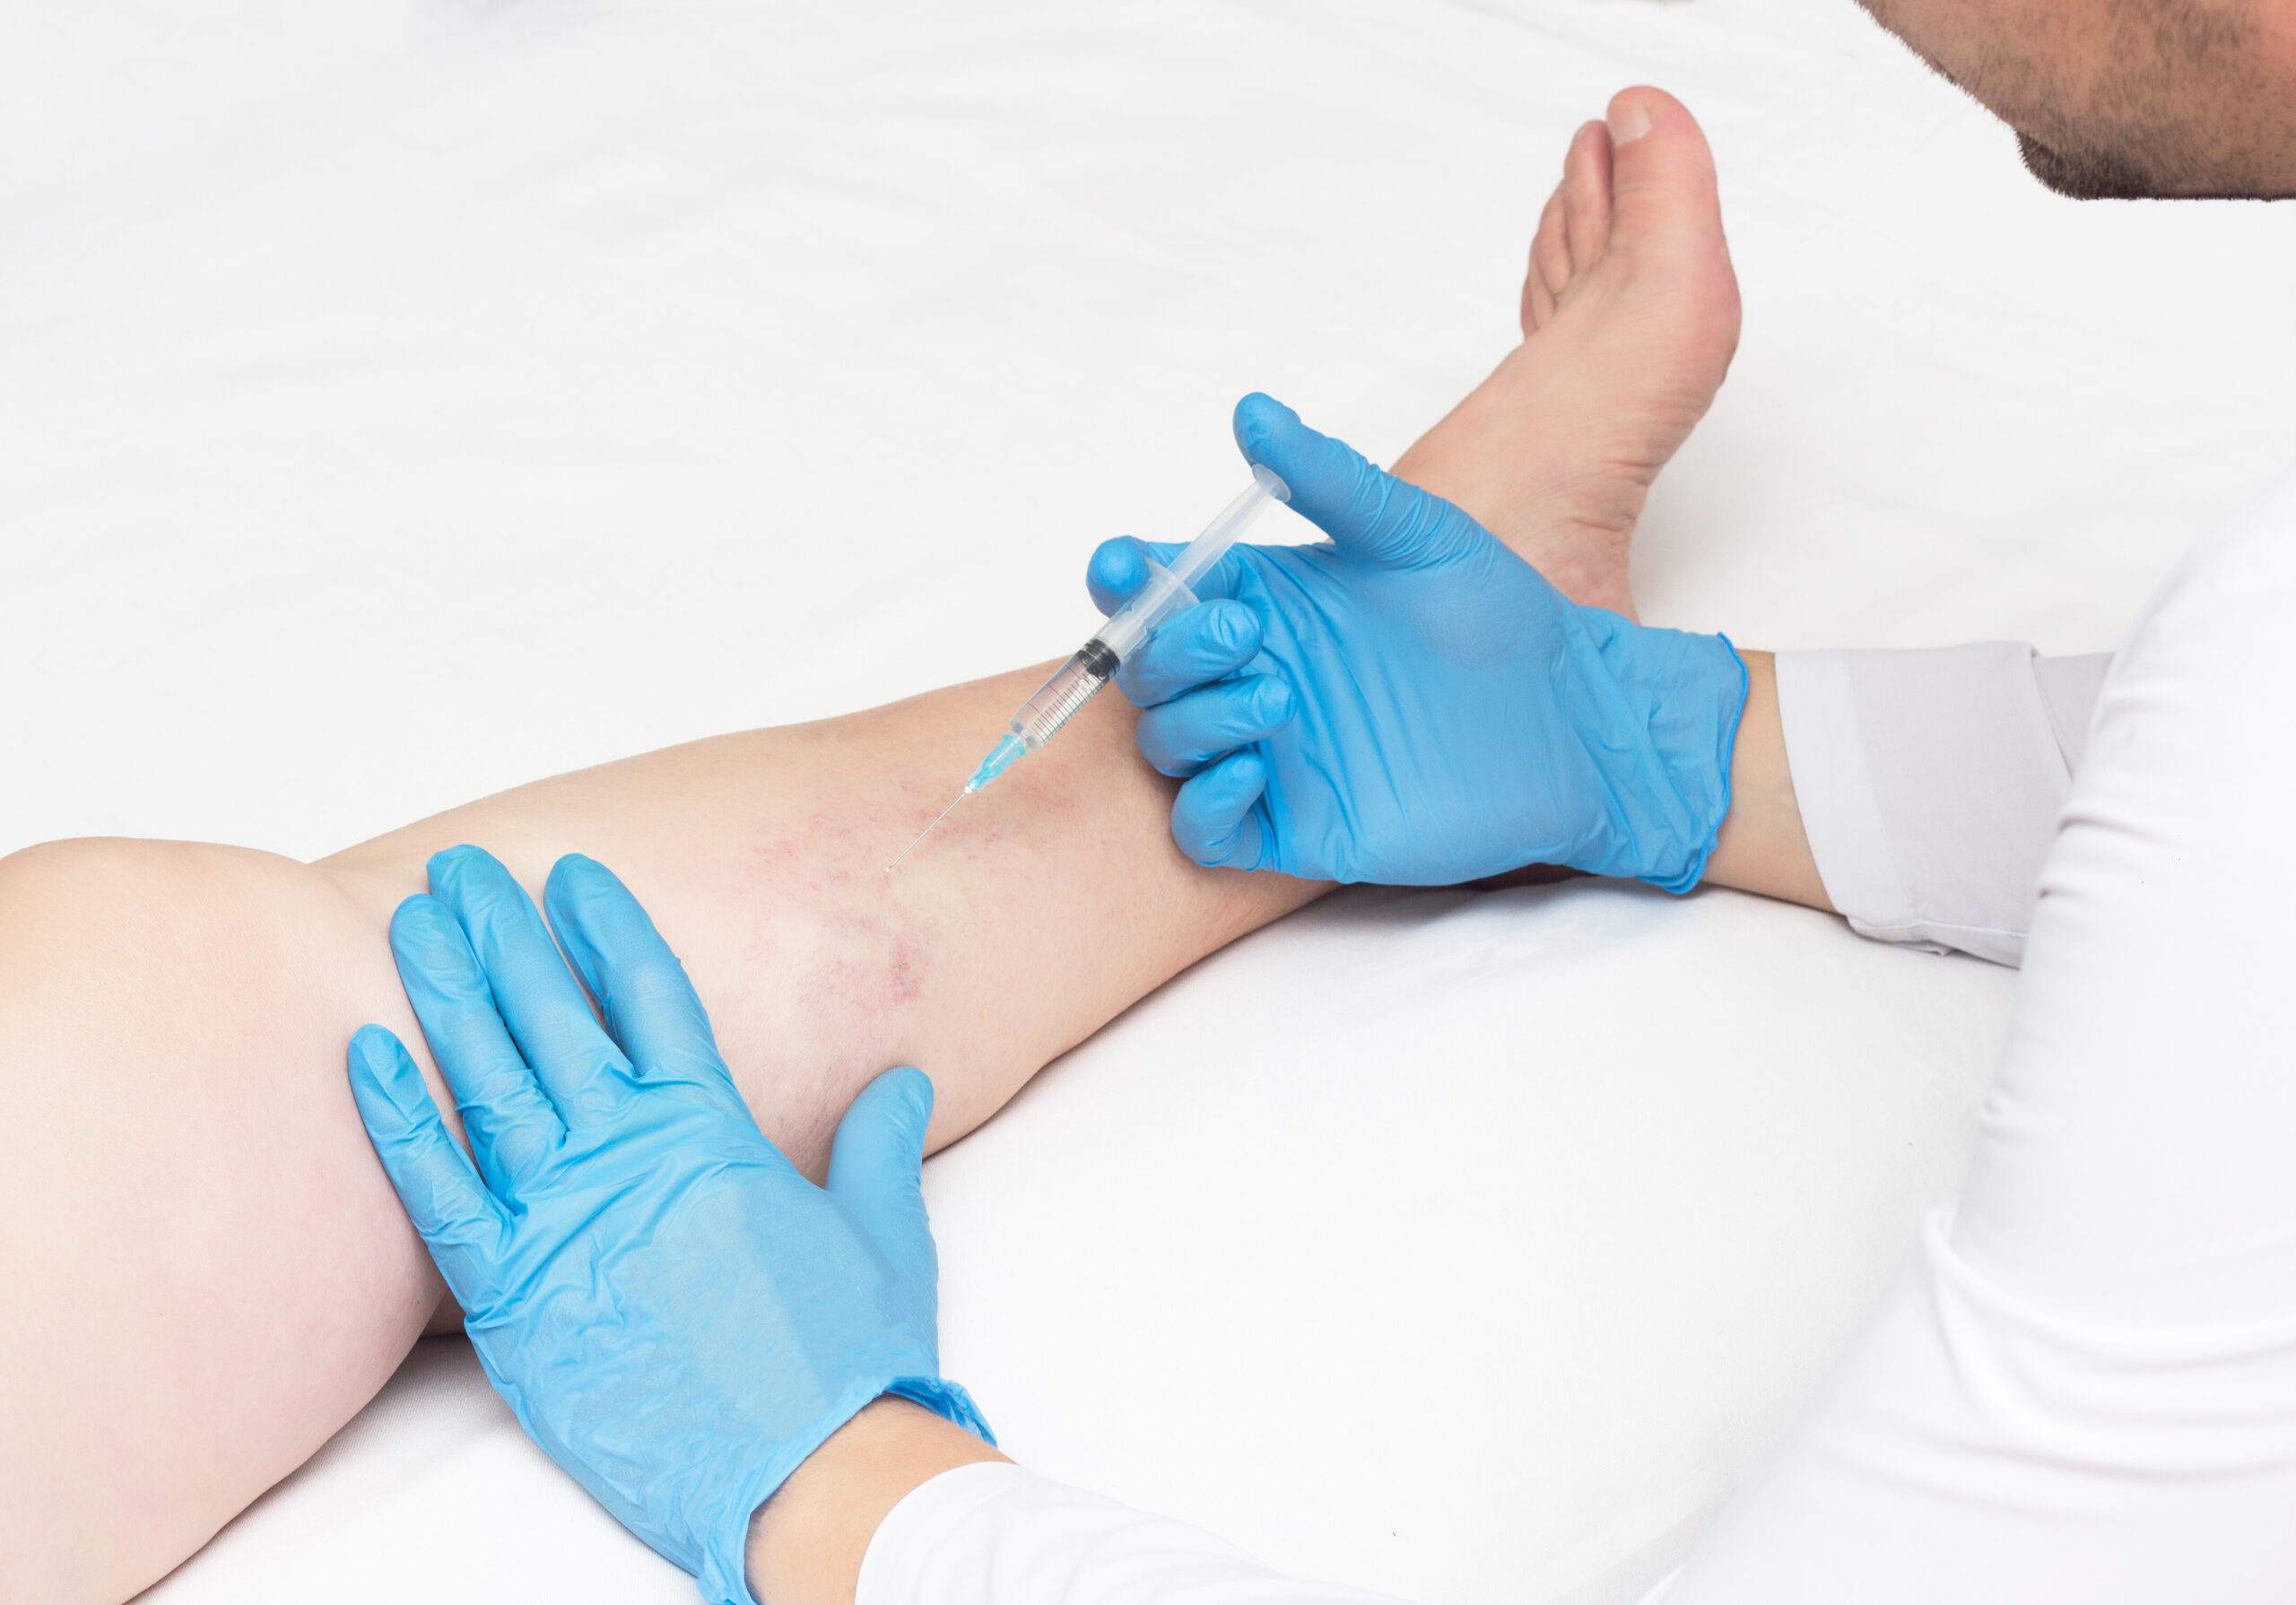 Copy-of-Sclerotherapy-shutterstock_1283406964-scaled (1)